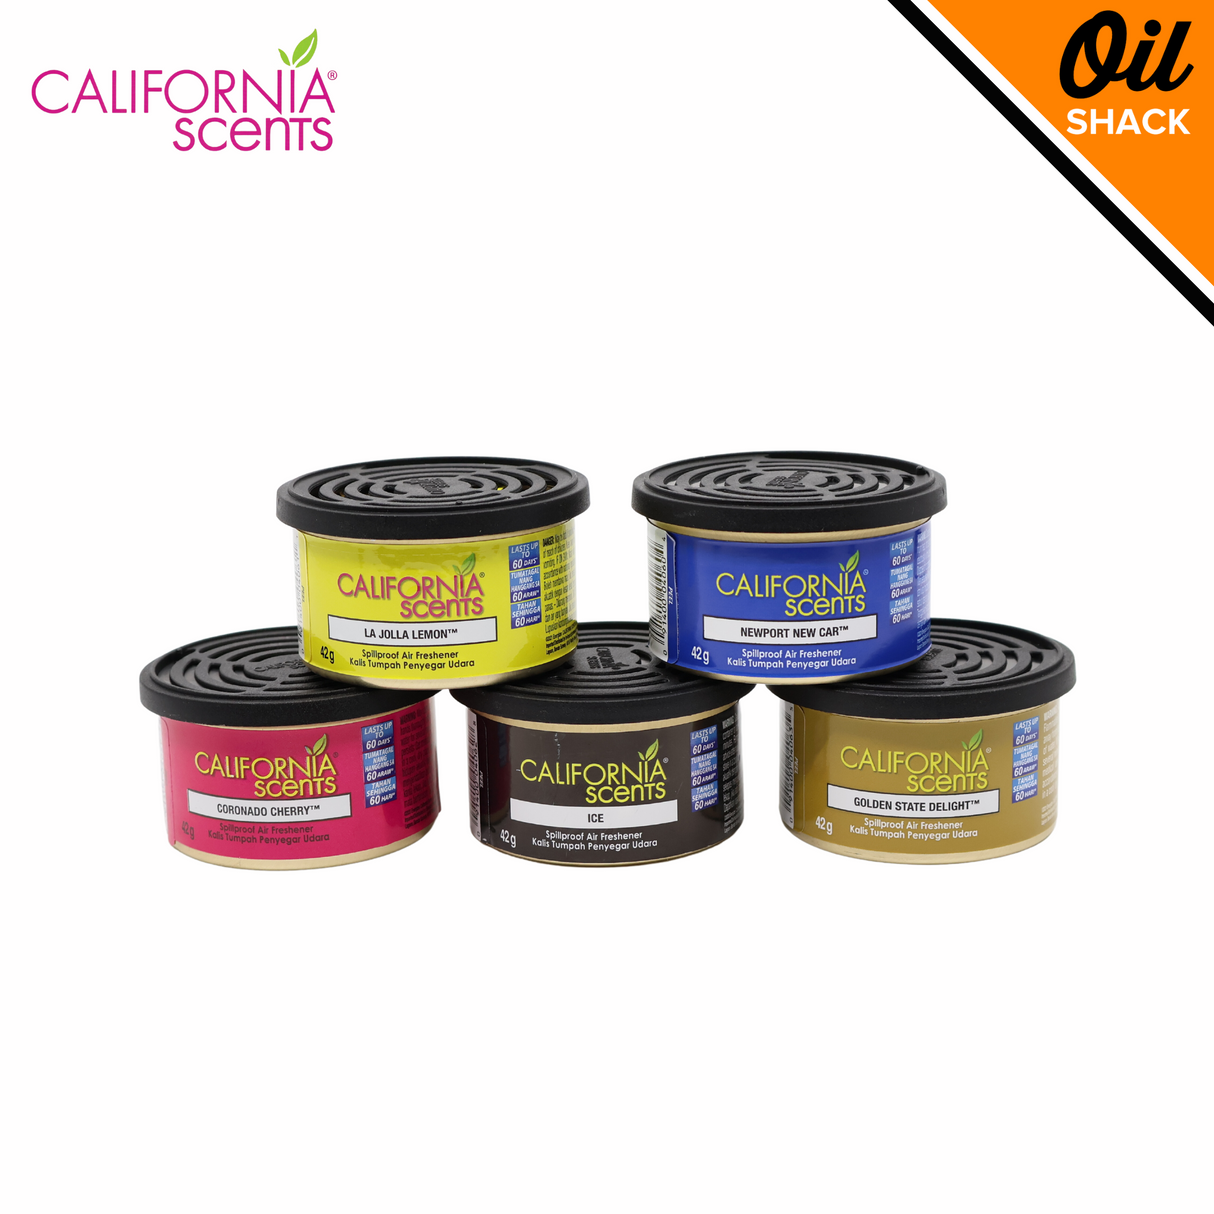 CALIFORNIA SCENTS ORGANIC CANISTER AIR FRESHENER – Oil Shack